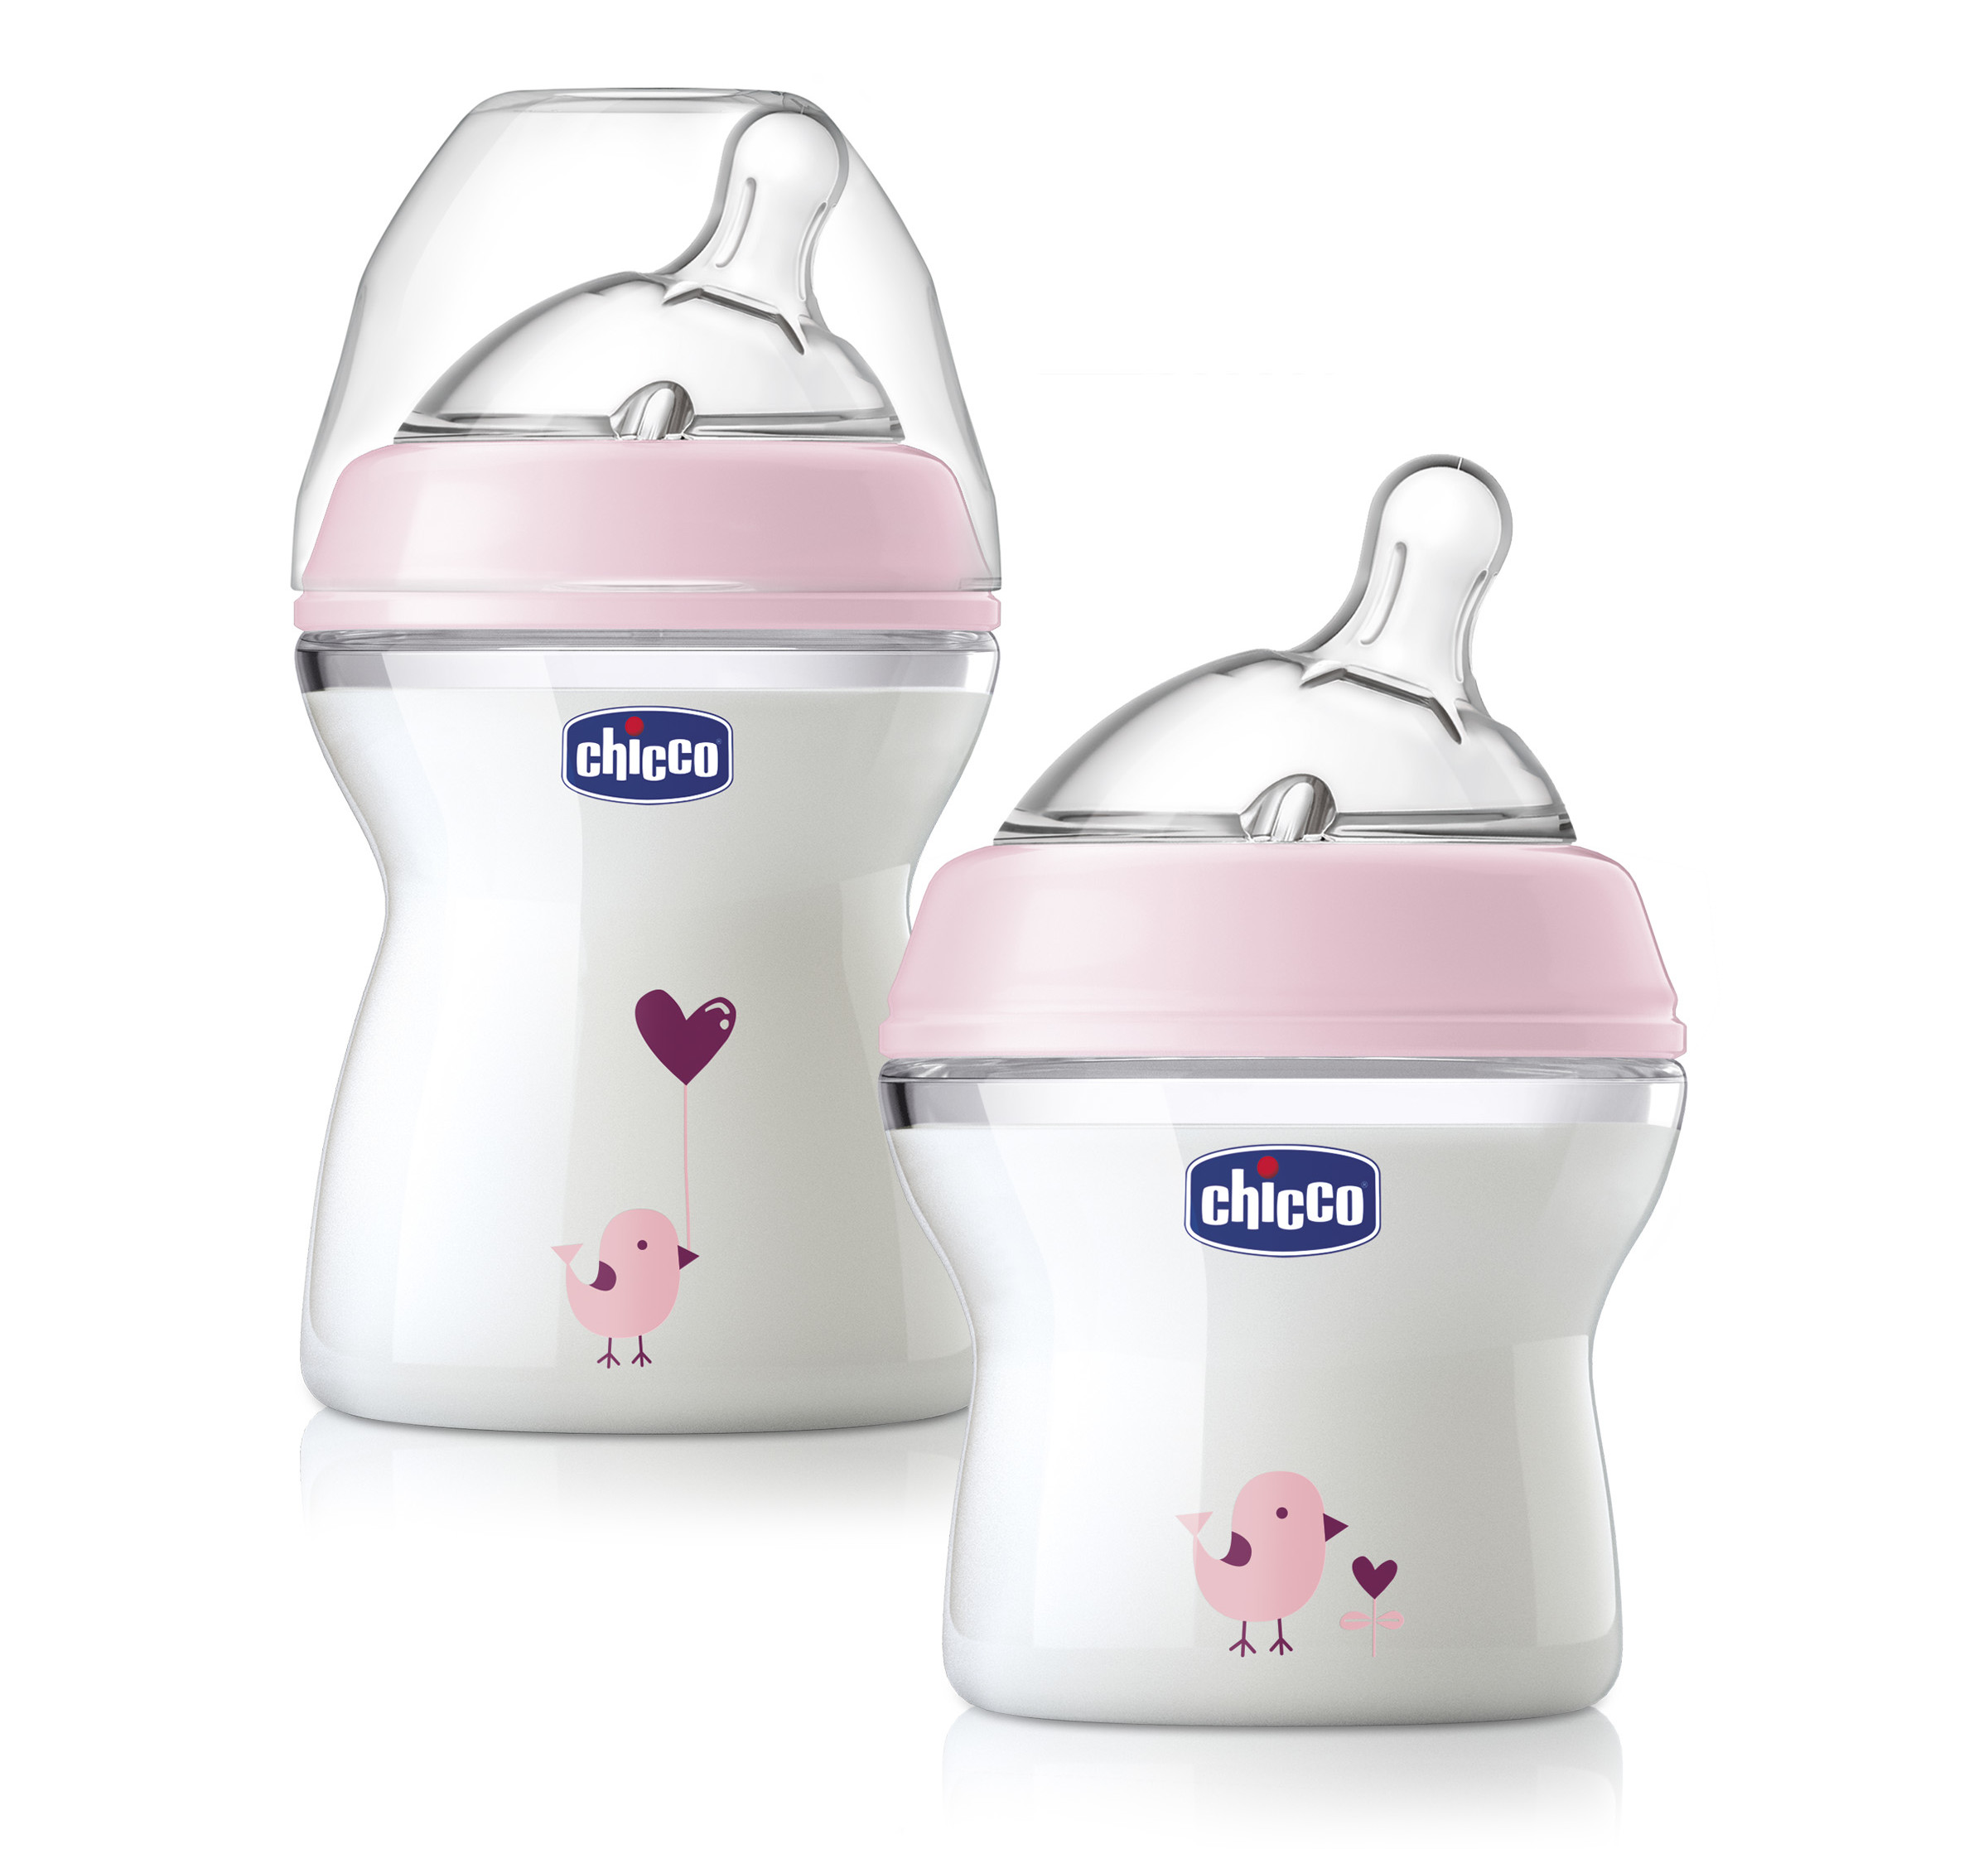 Chicco's NaturalFit Bottle